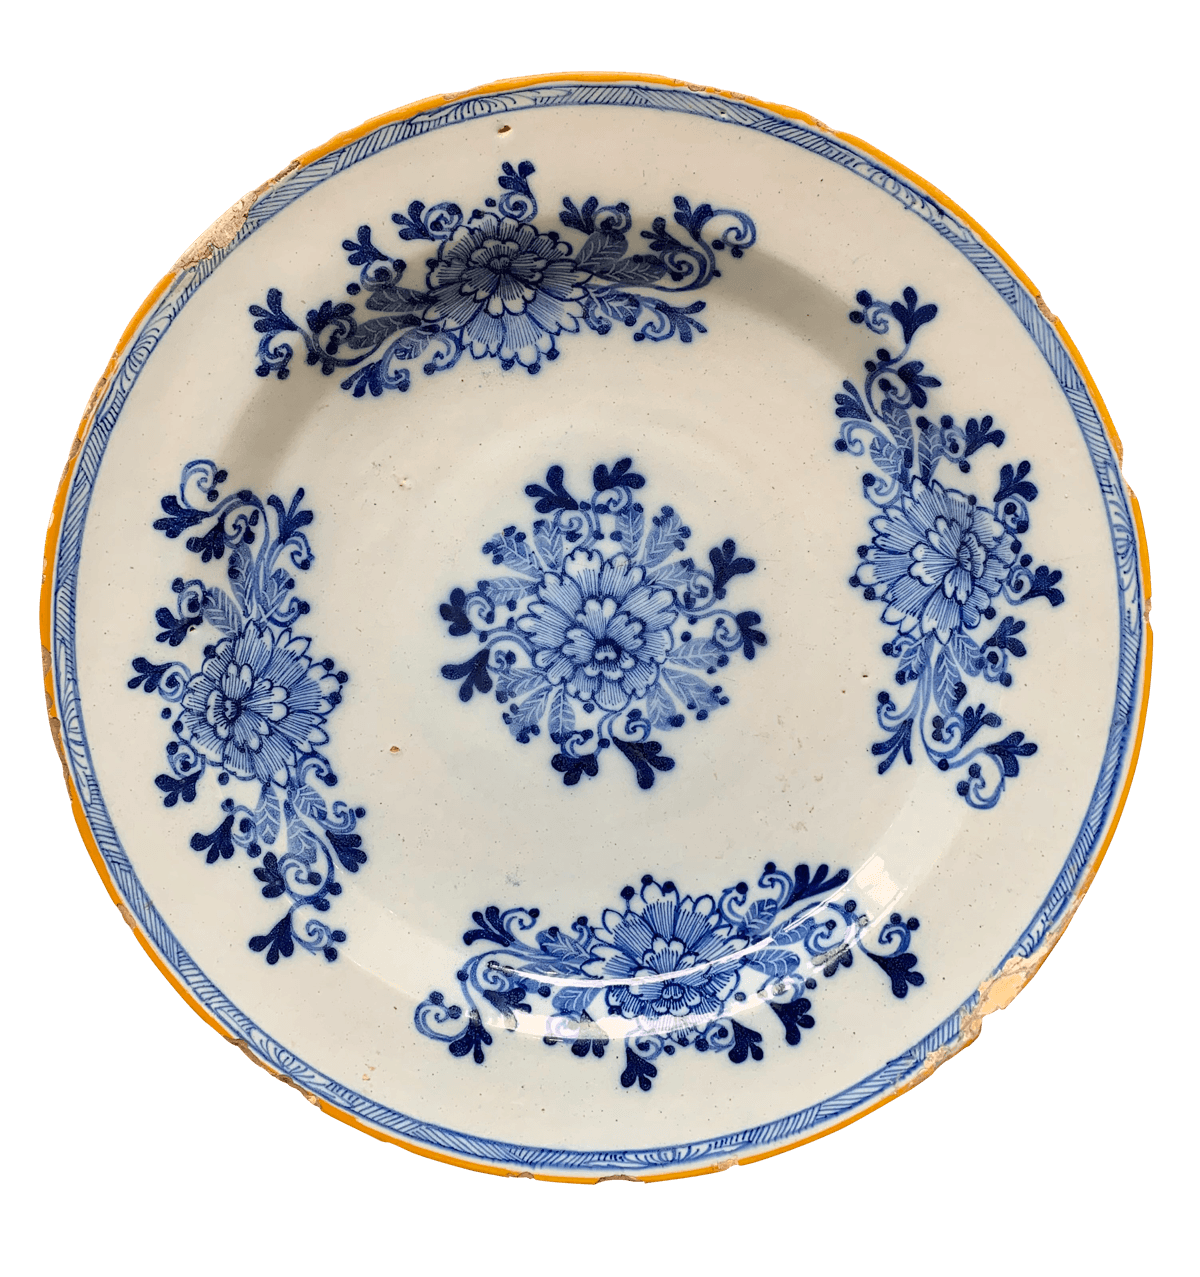 18TH CENTURY DUTCH DELFT CHARGER